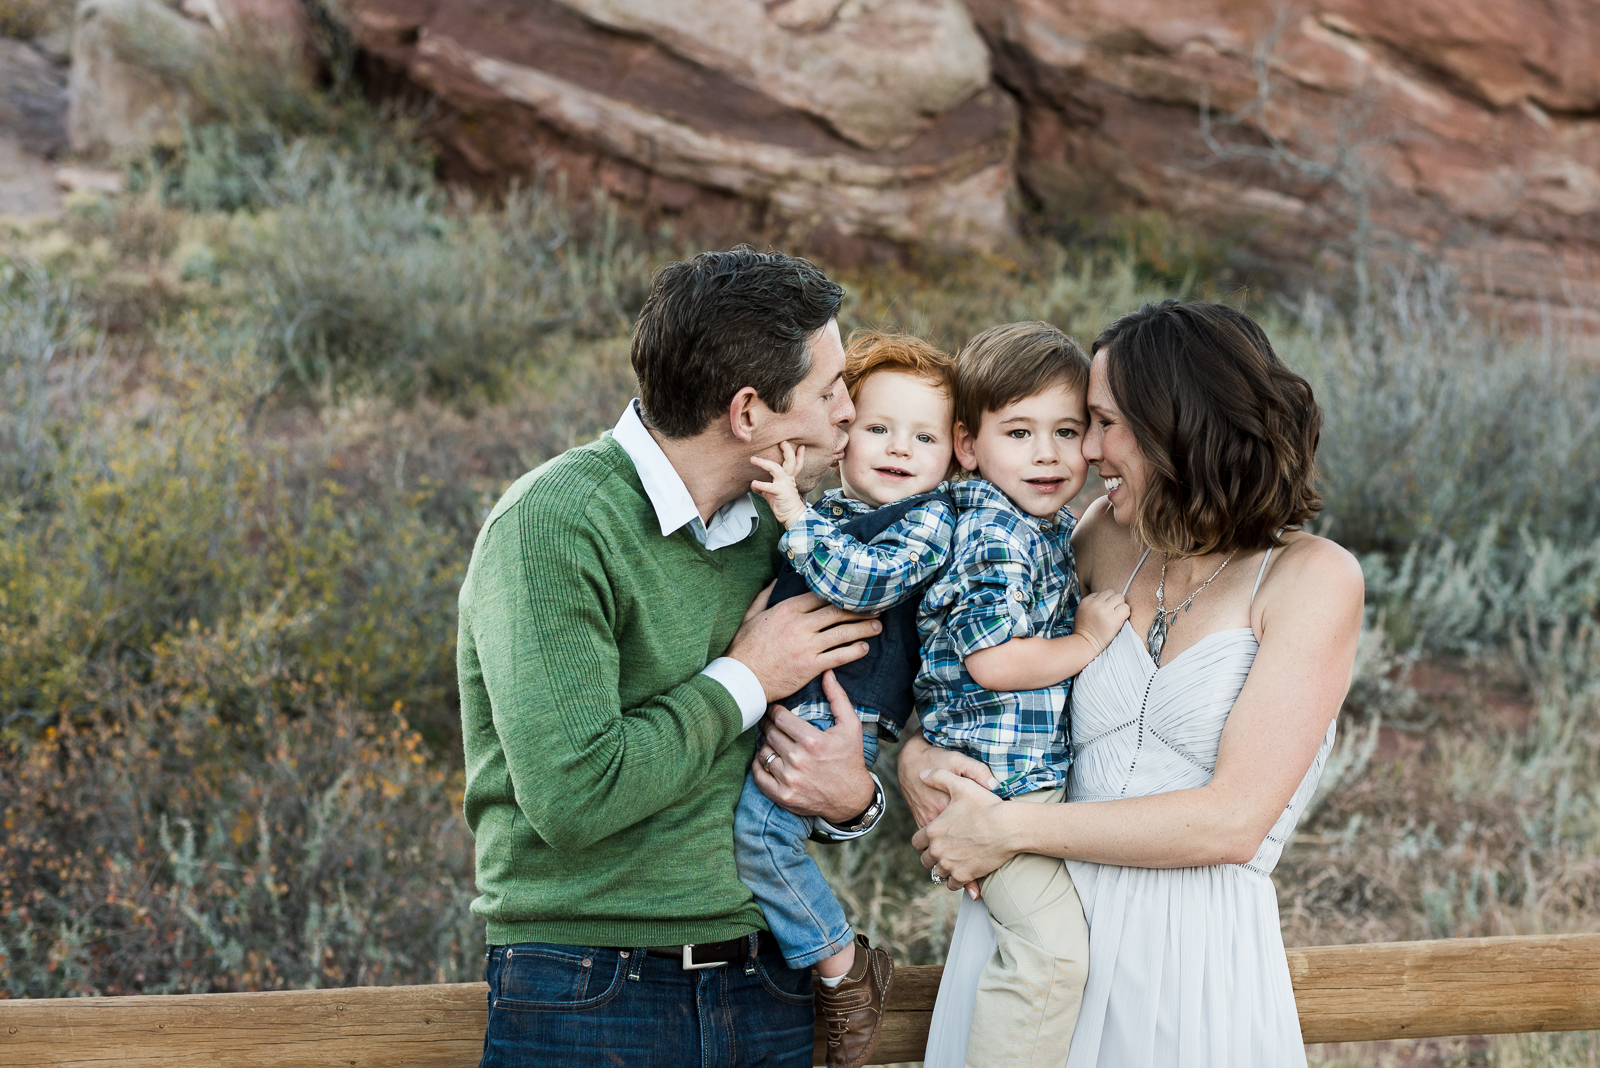 Nicole & Carm | Family Photo | Red Rocks | From the Hip Photo